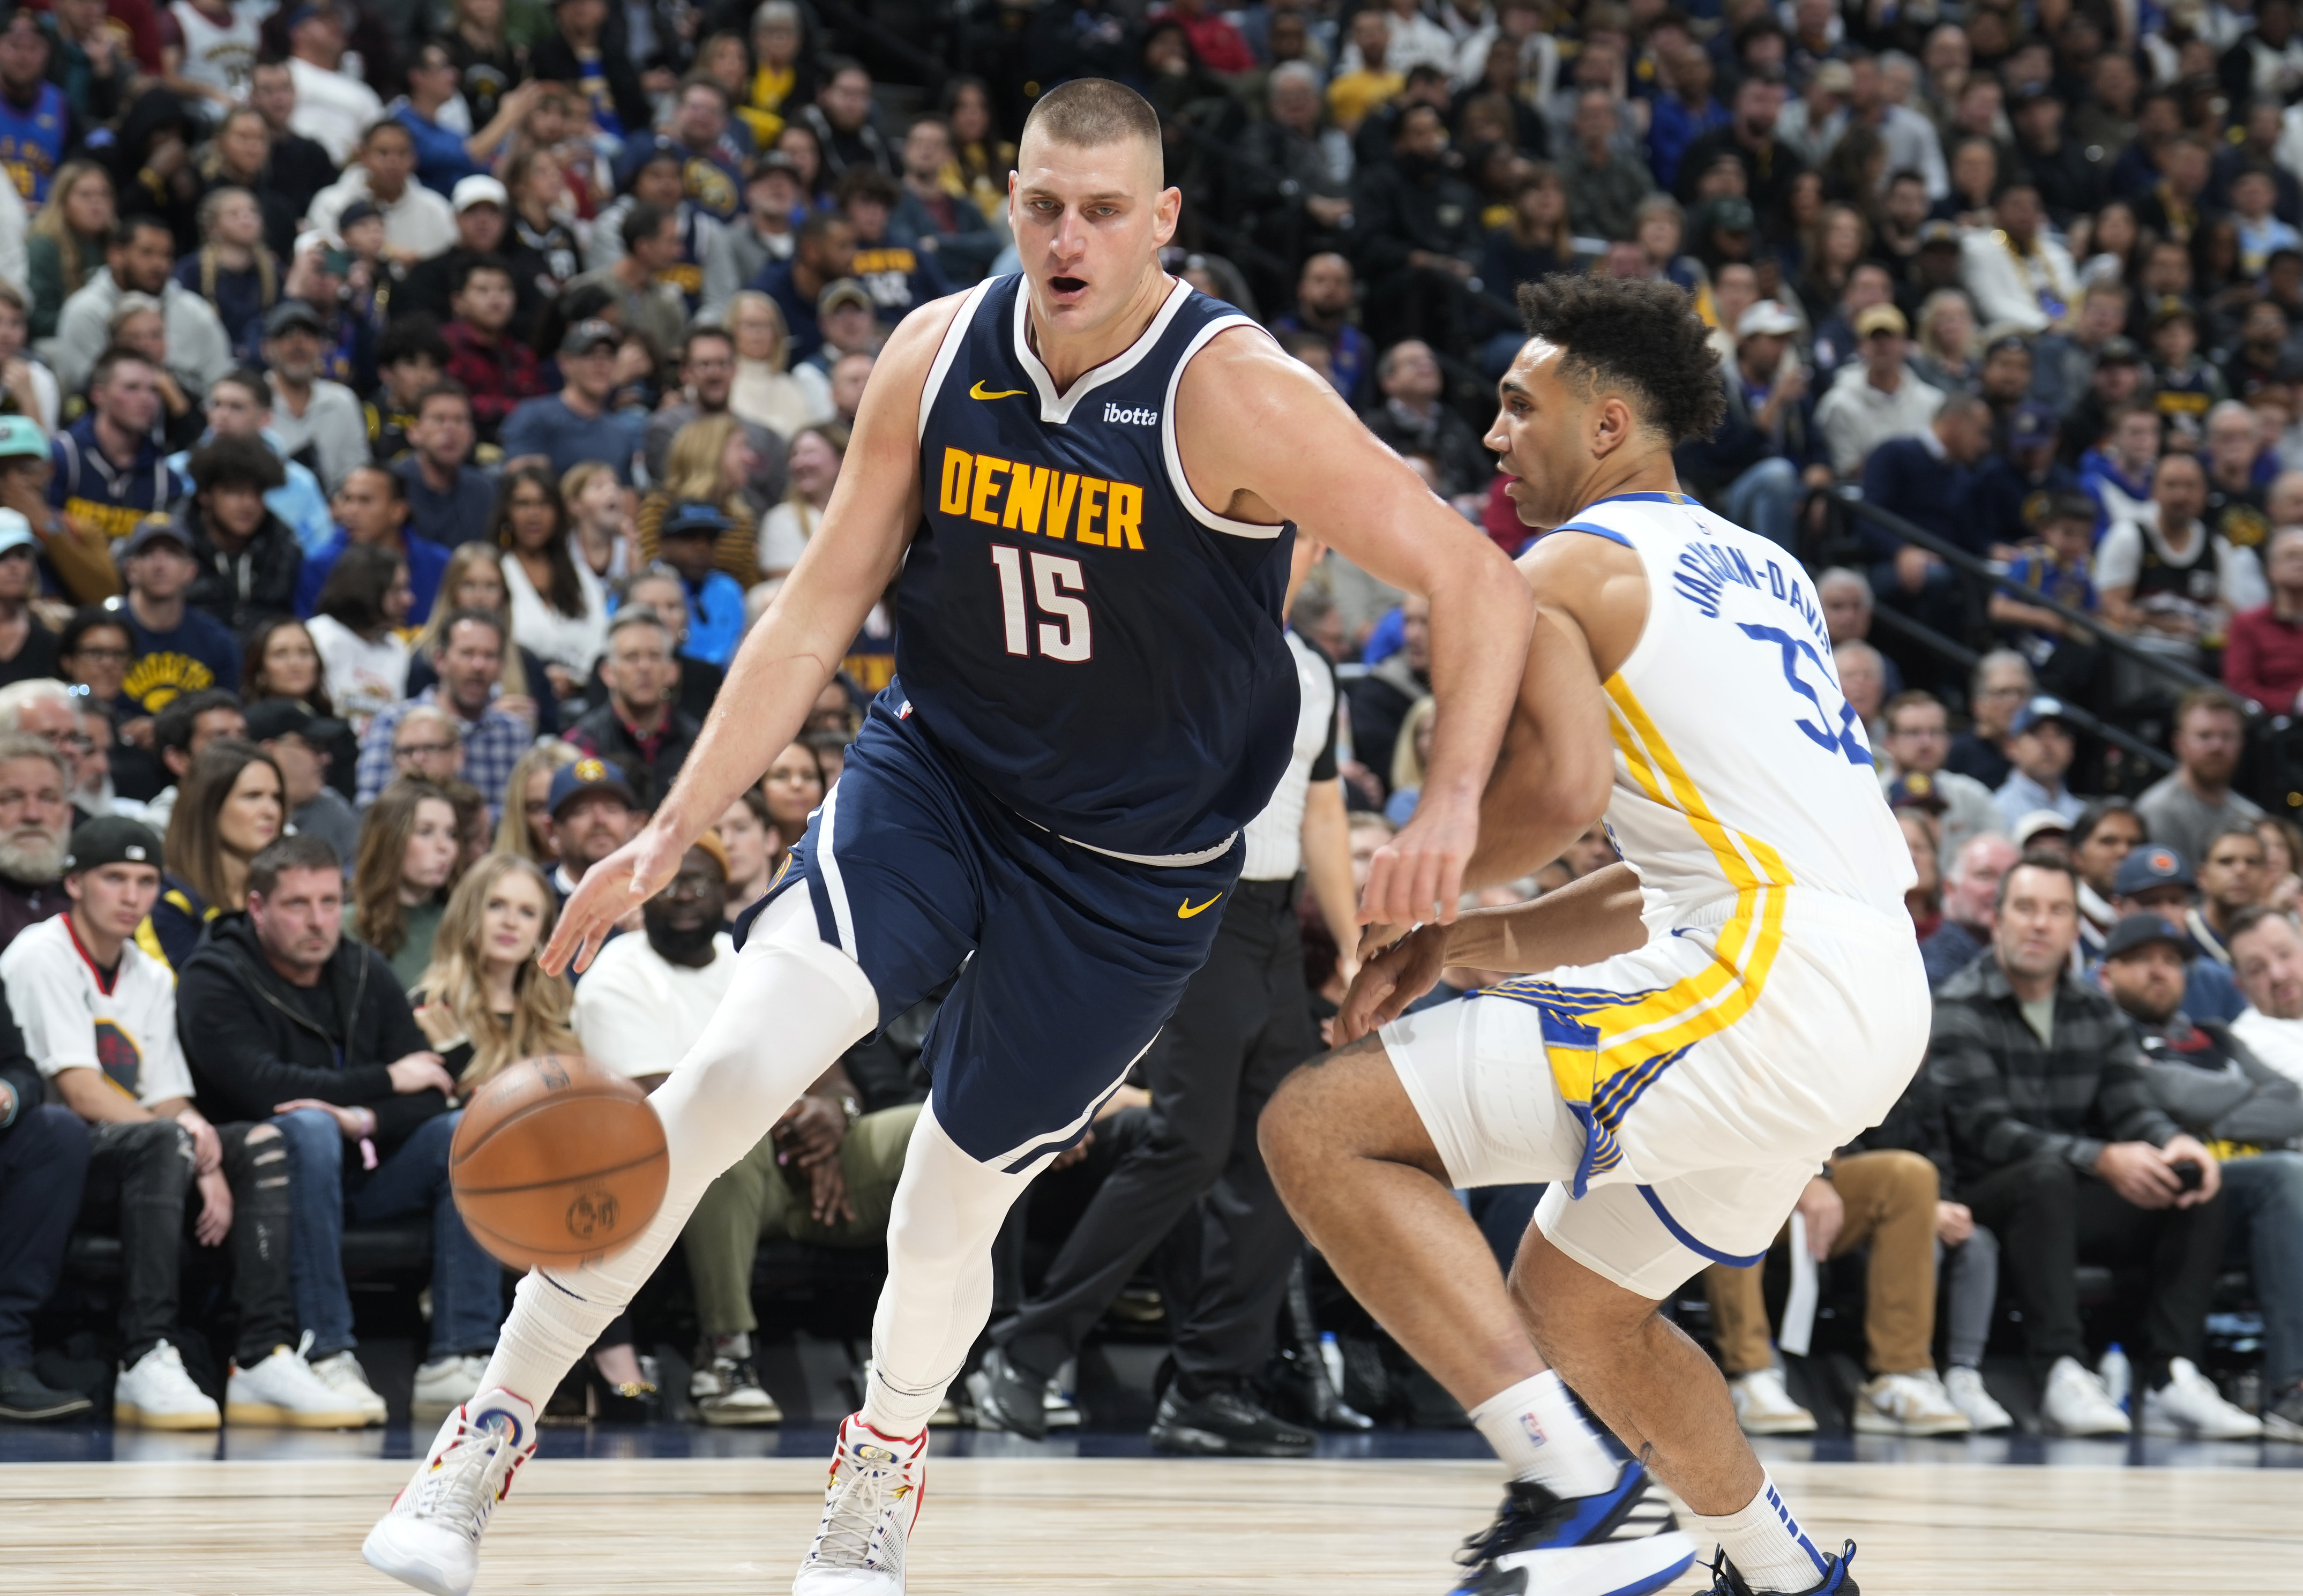 Buy tickets for Nuggets vs. Warriors on November 8